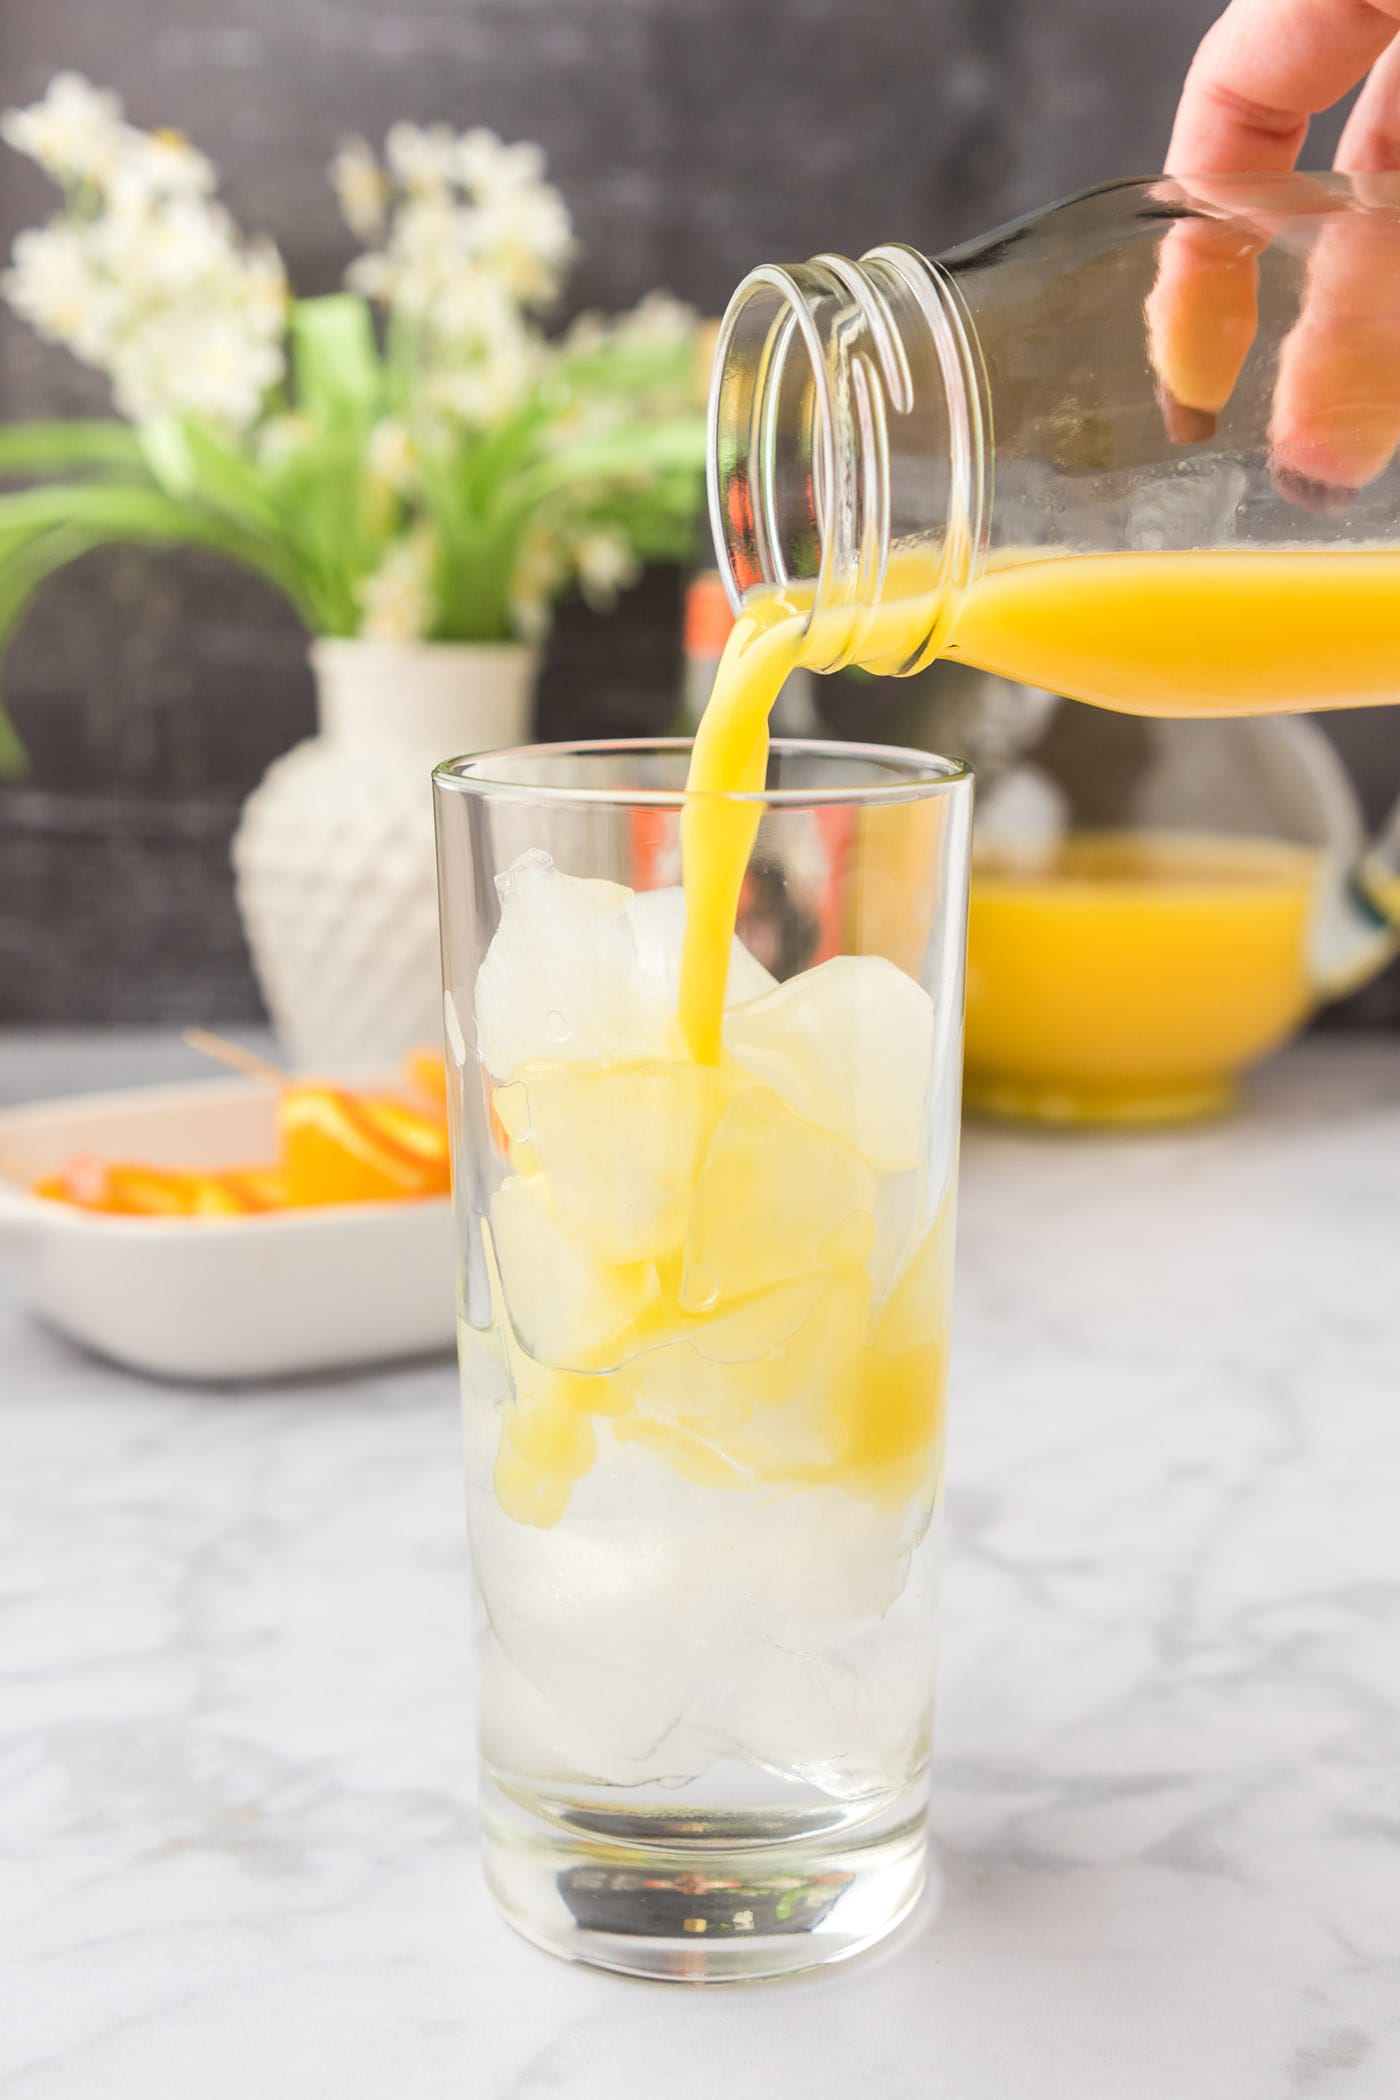 pouring orange juice into glass of peach schnapps and ice